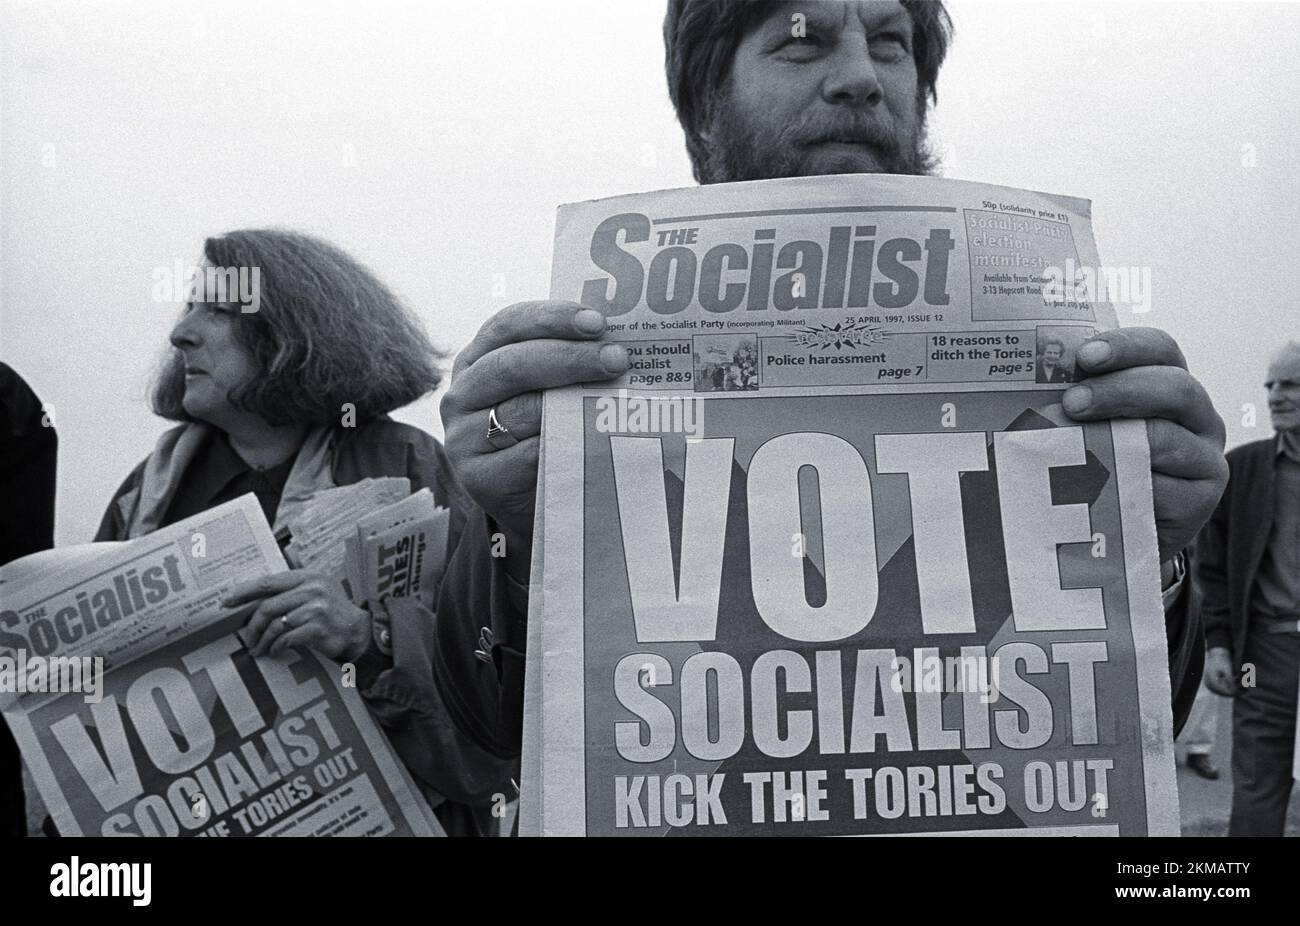 Activists selling The Socialist Newspaper, 1997 UK Election Stock Photo